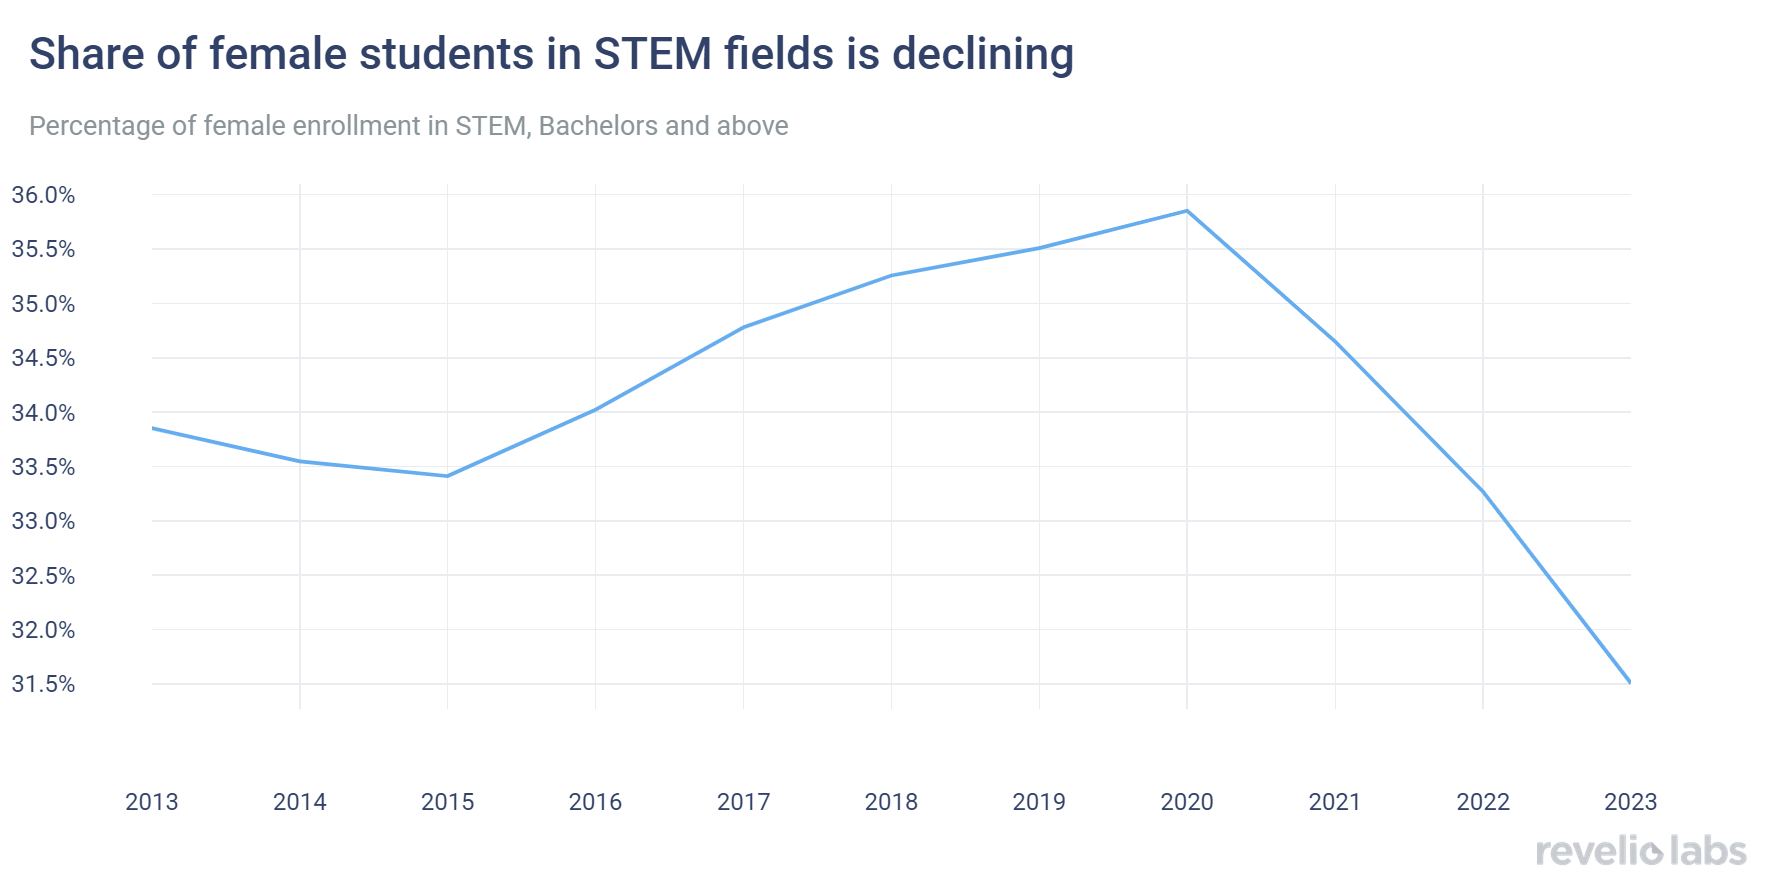 Share of female students in STEM fields is declining